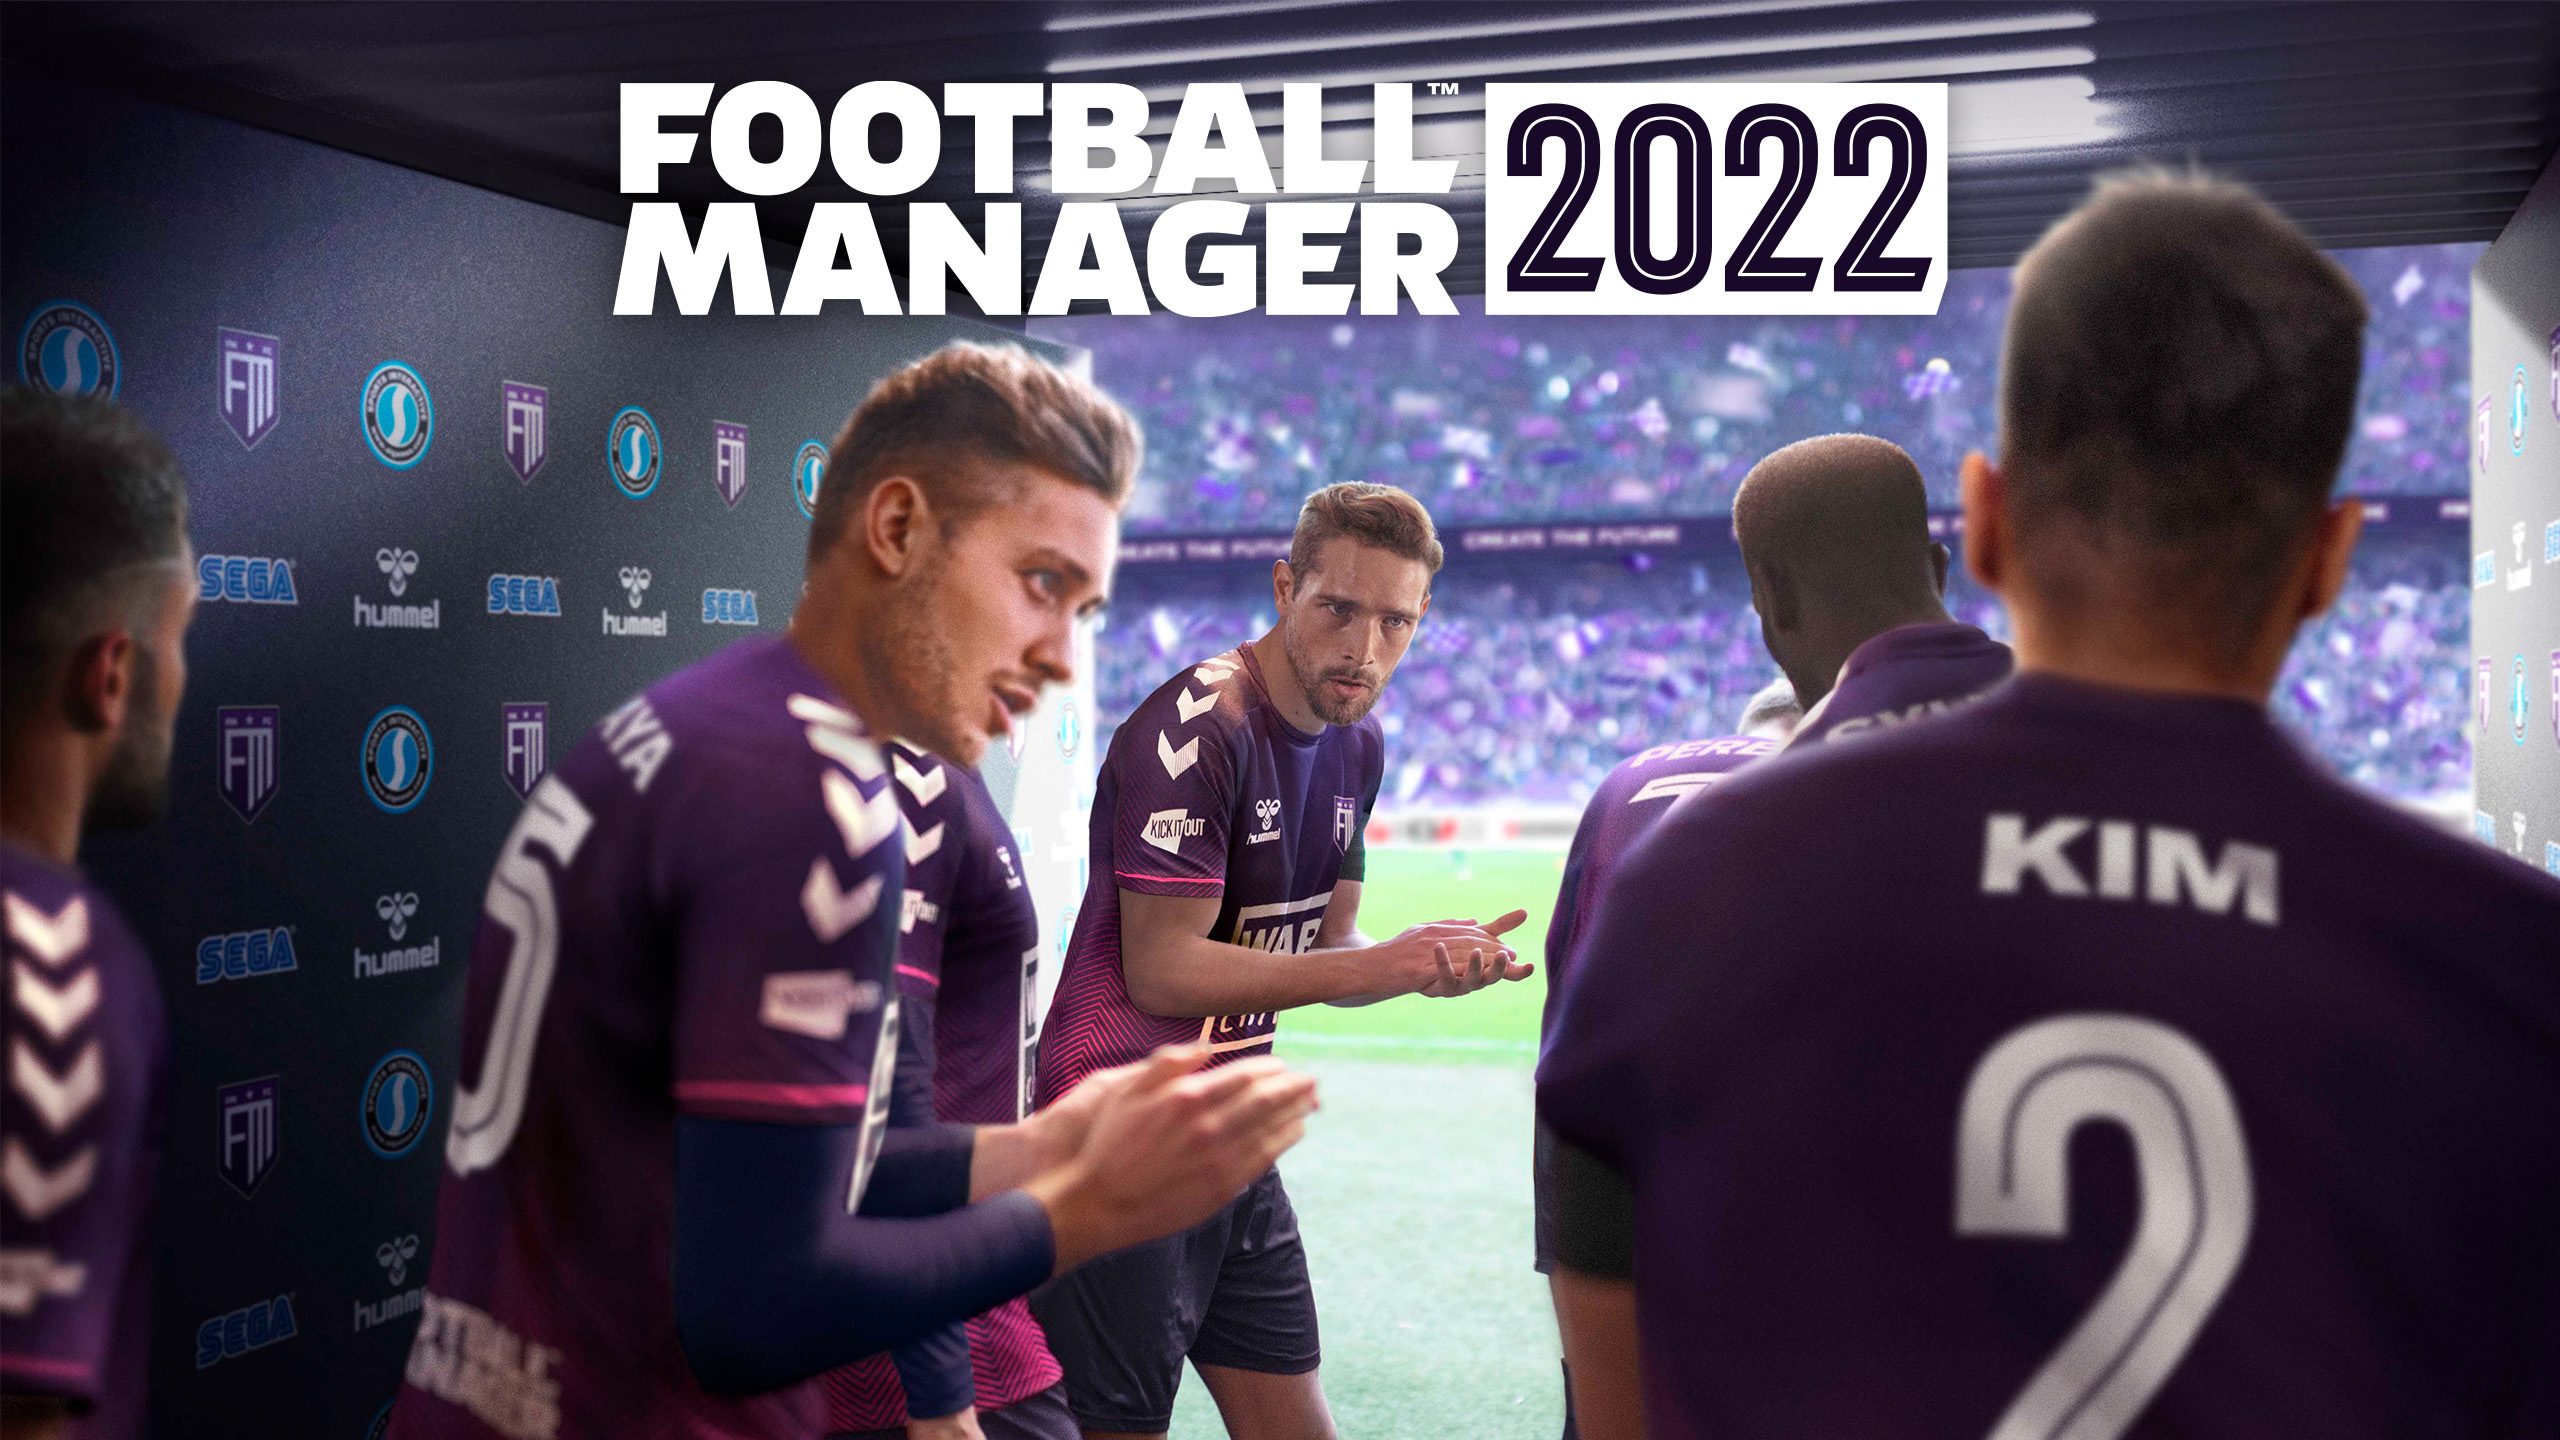 Free football manager 22 -  is giving free football manager